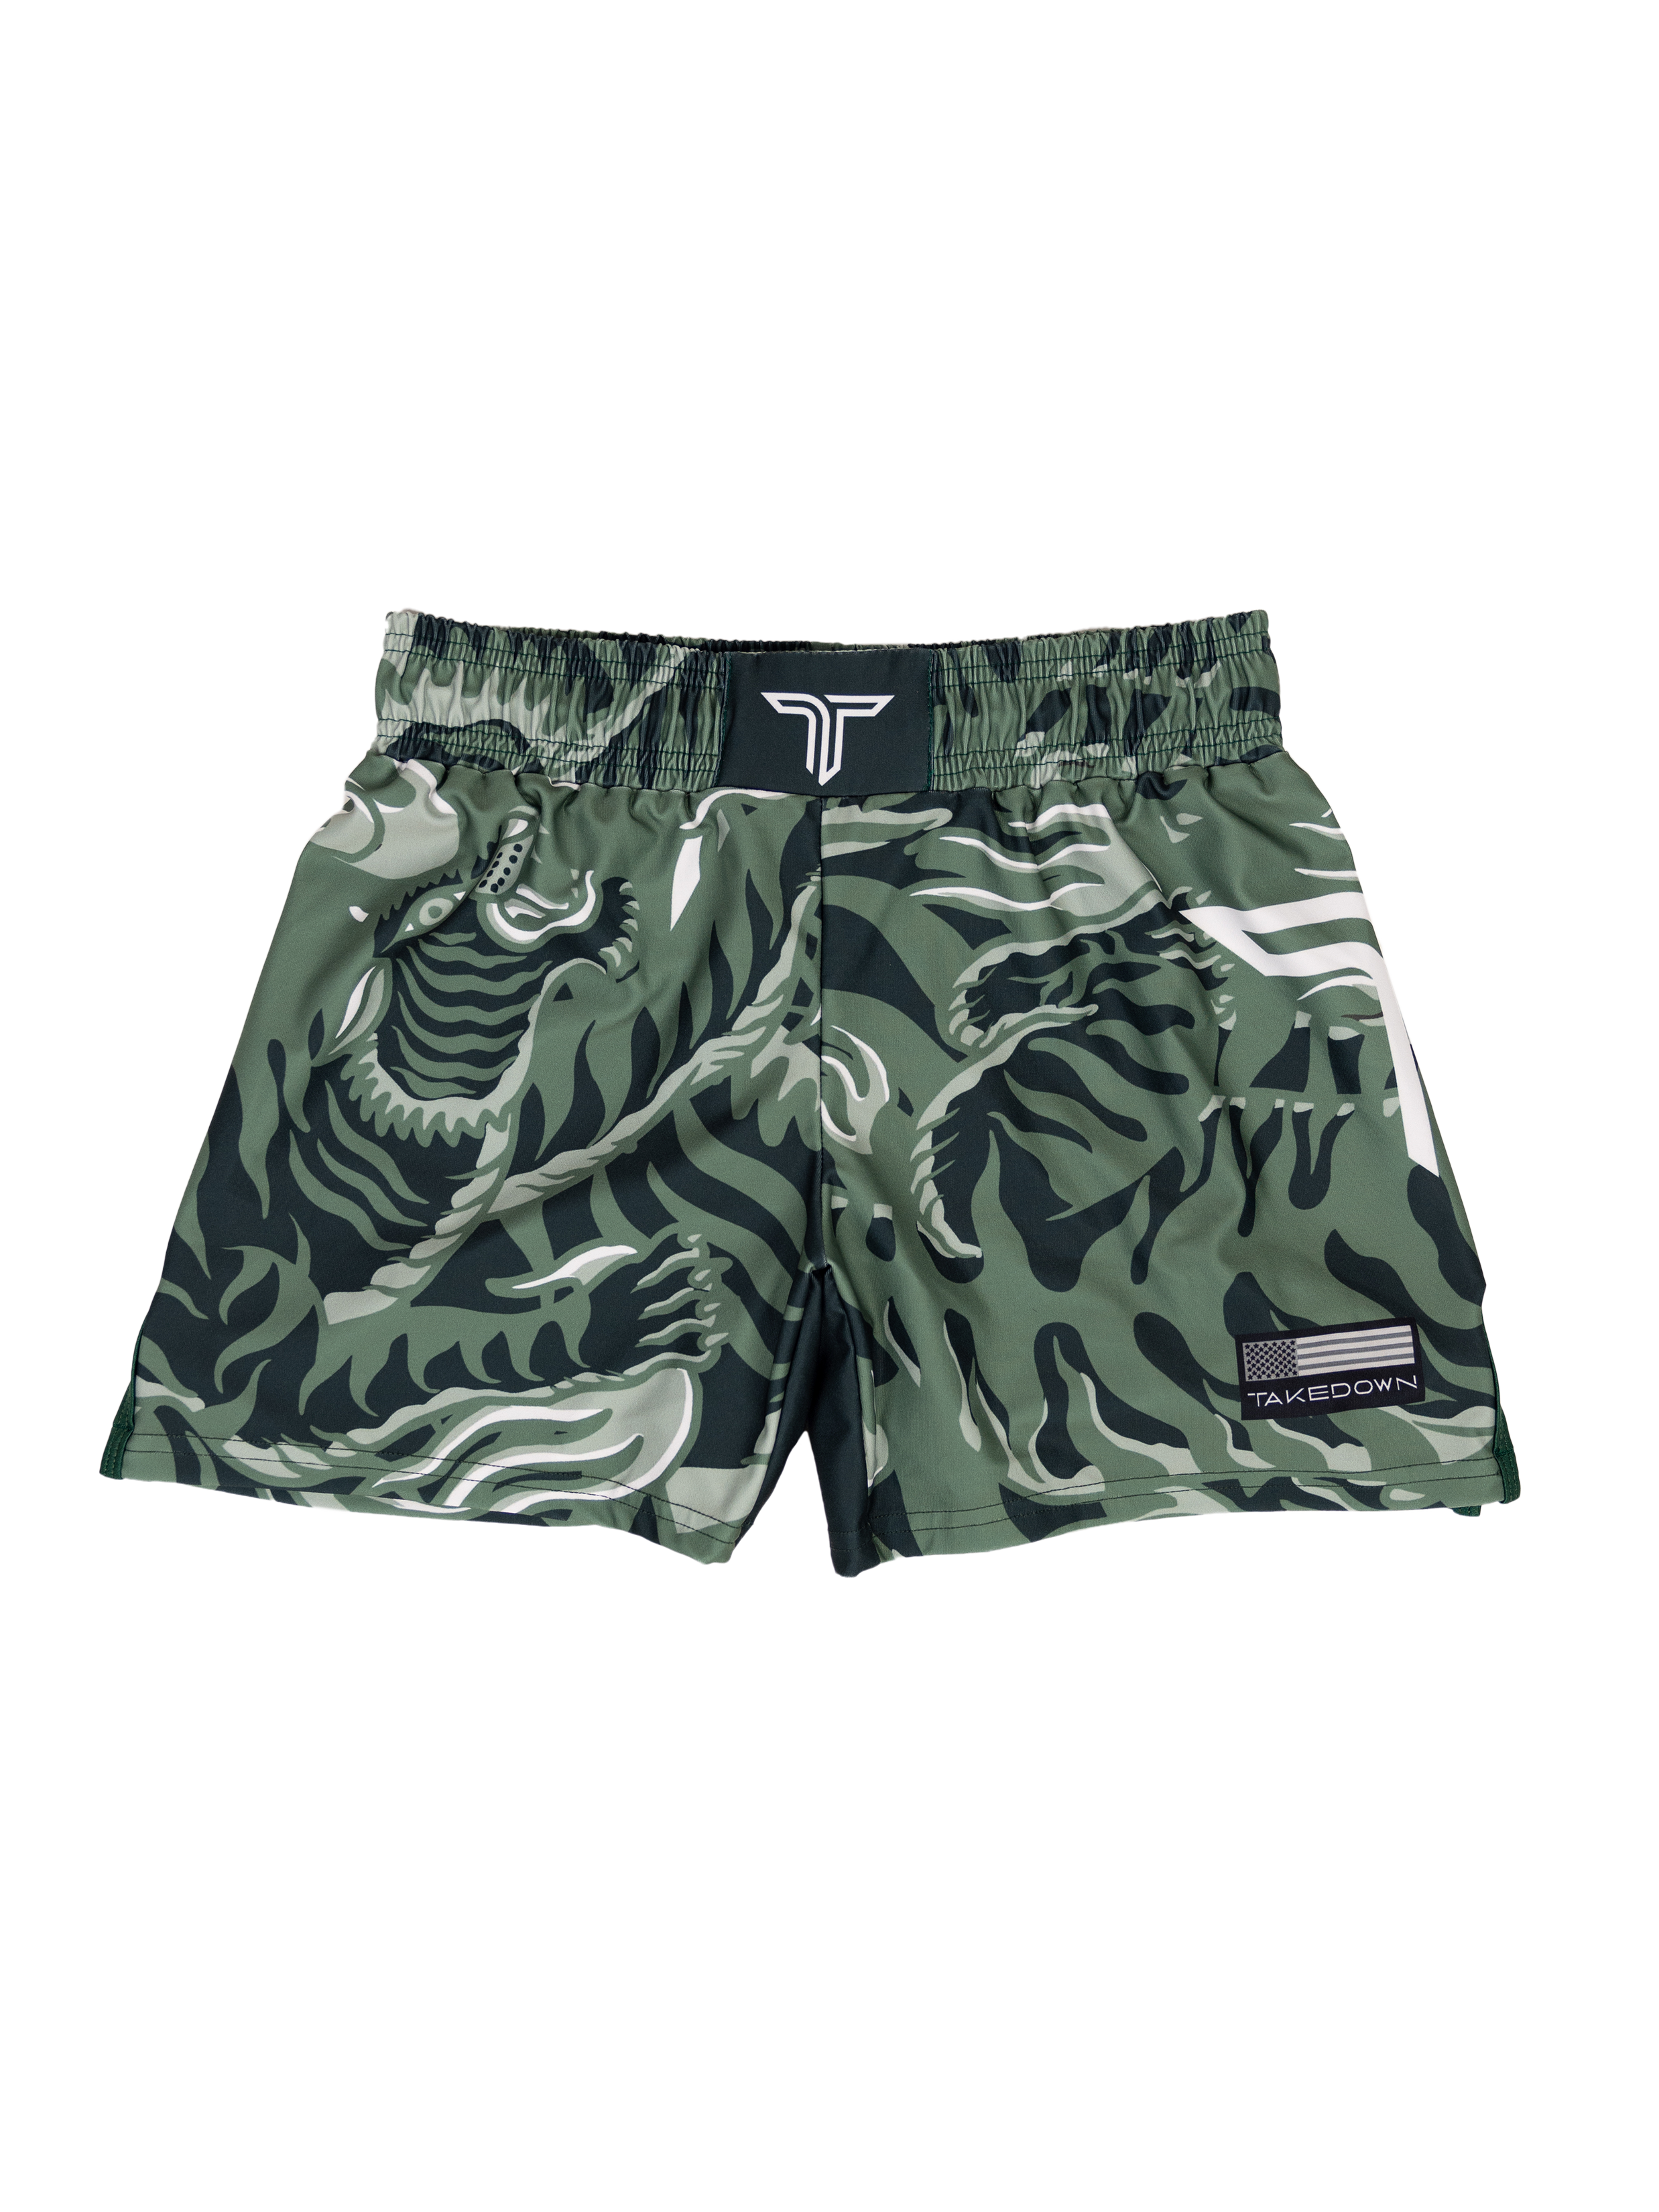 'Tiger Fight' Fight Shorts - Moss Green (5